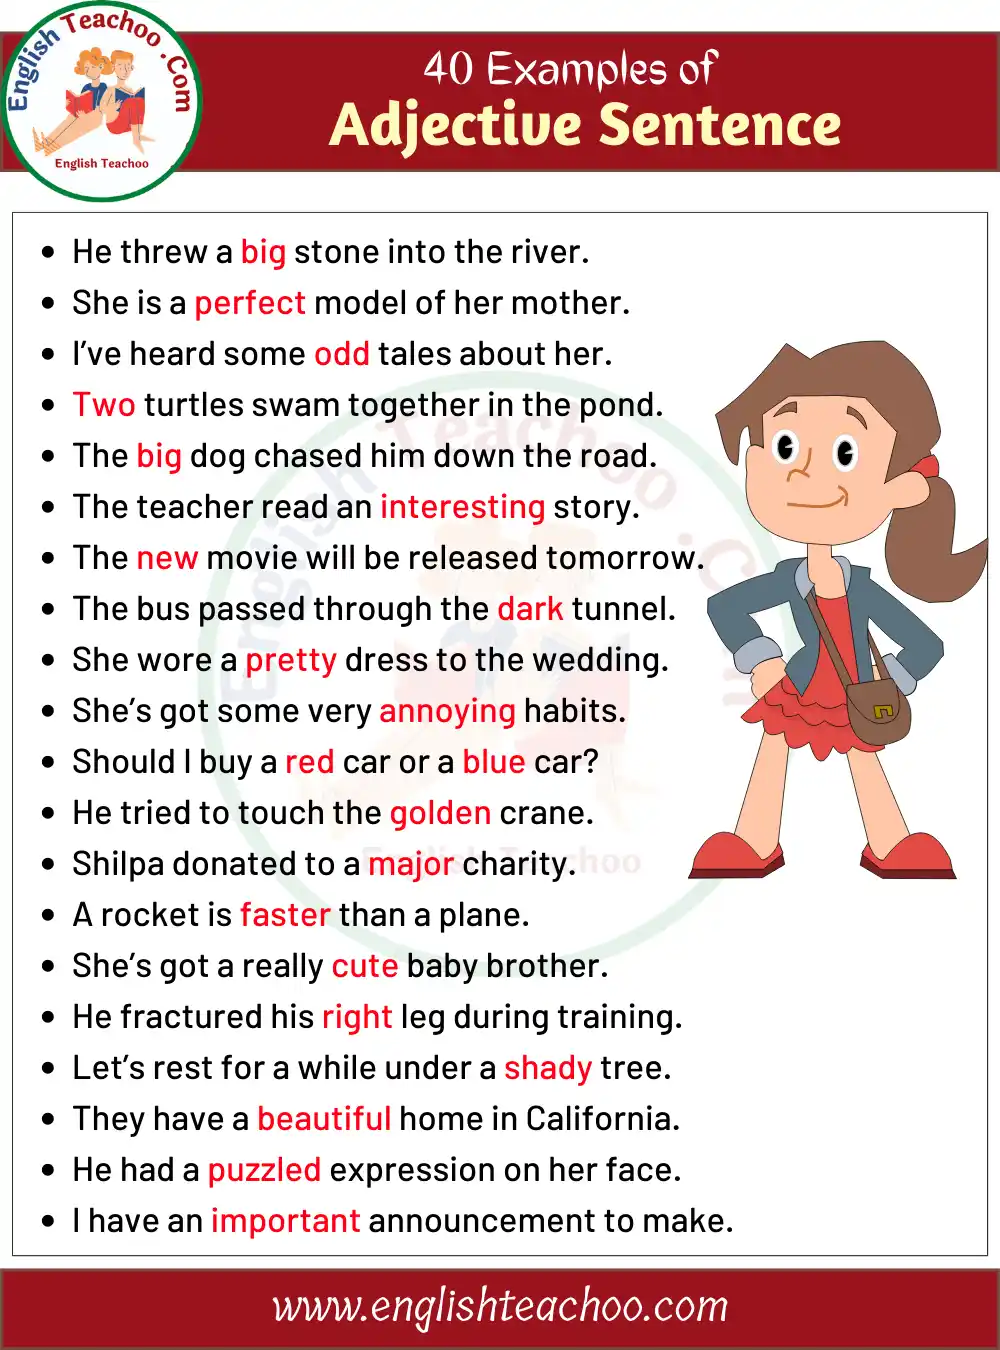 40 Examples of Adjectives In Sentences Adjective Sentence Examples